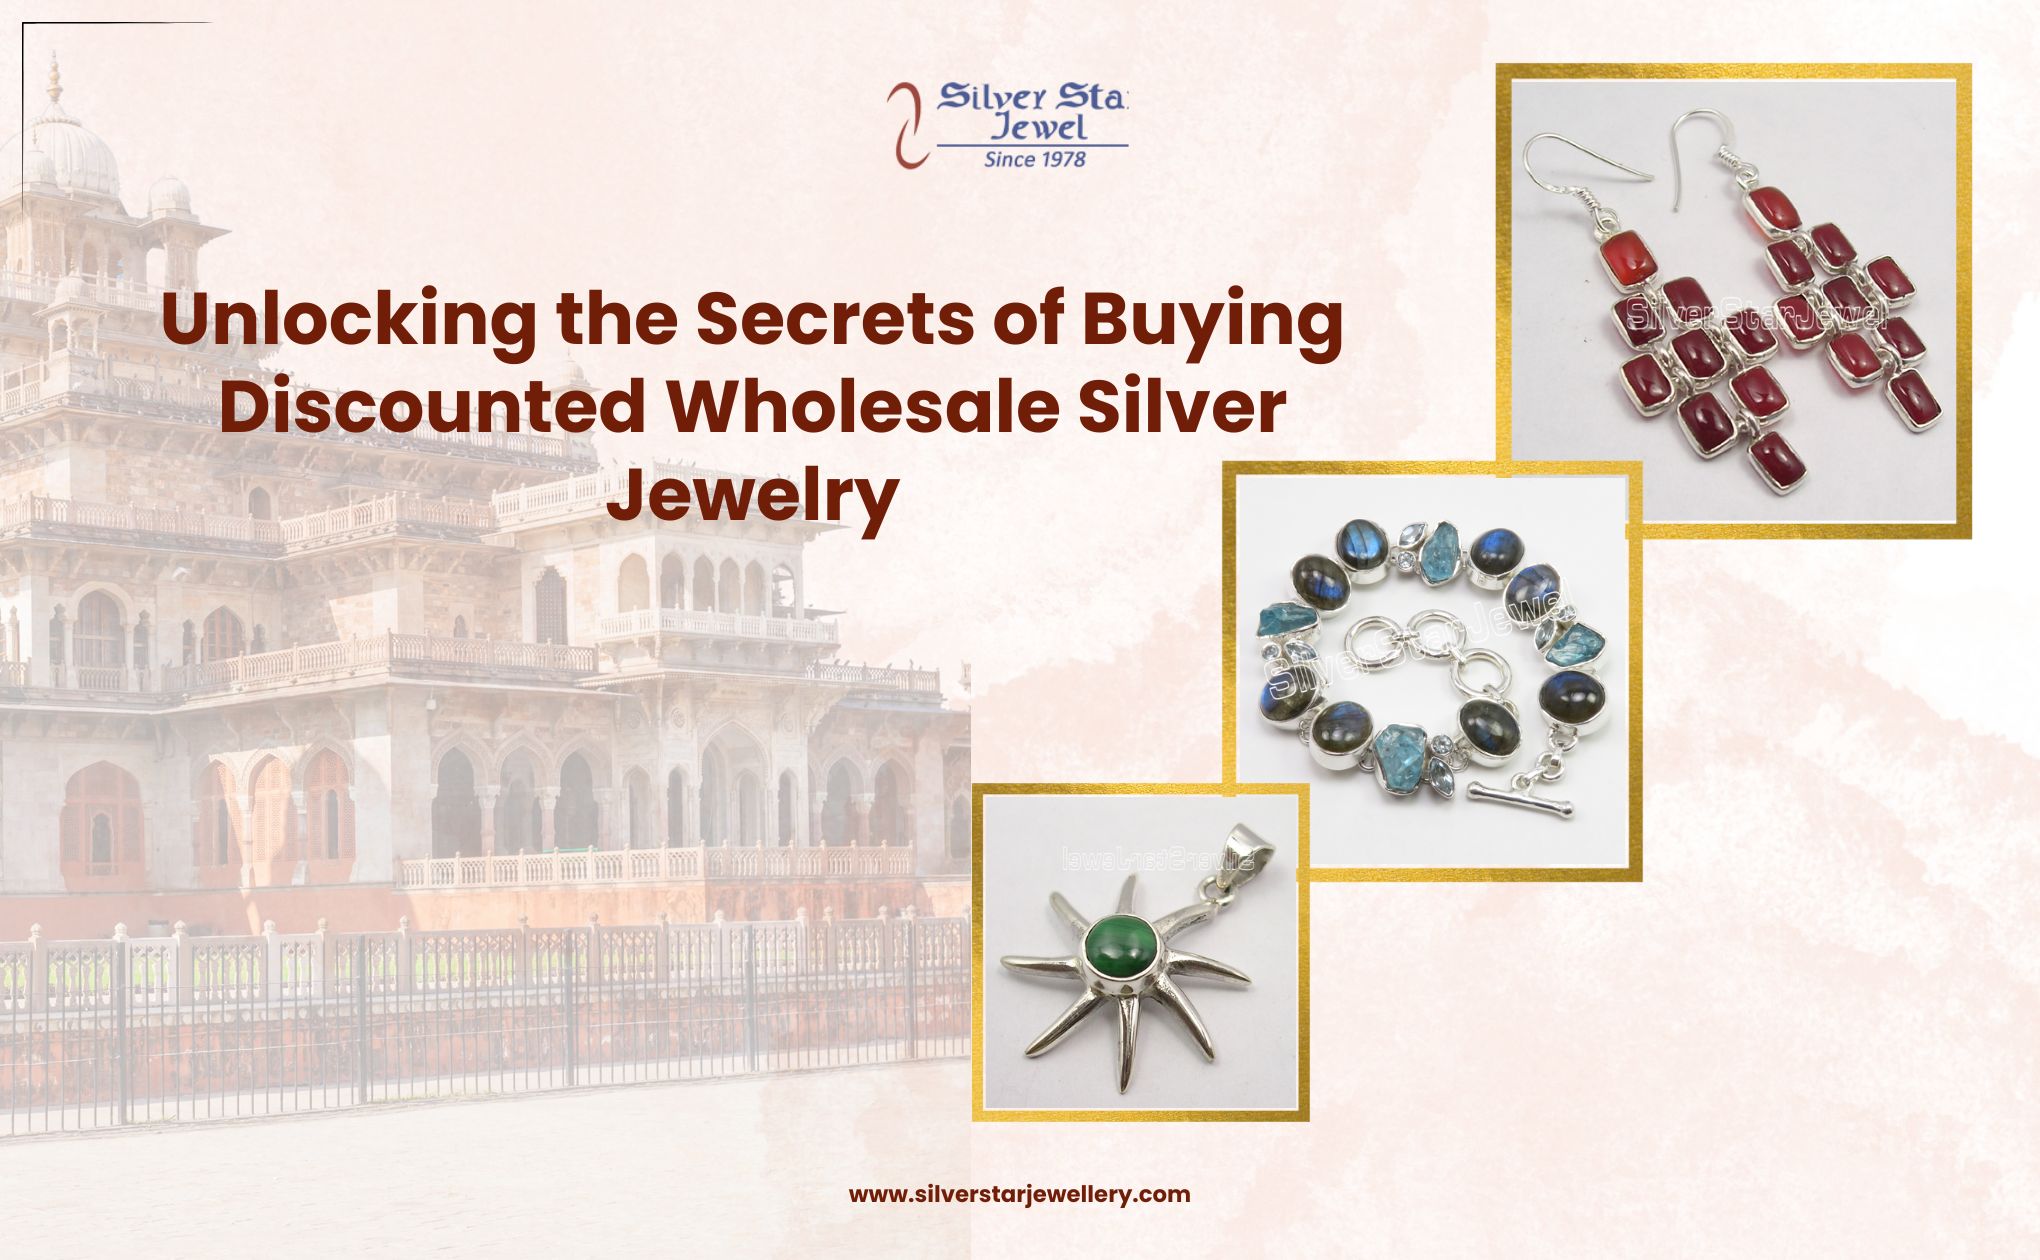 Unlocking the Secrets of Buying Discounted Wholesale Silver Jewelry